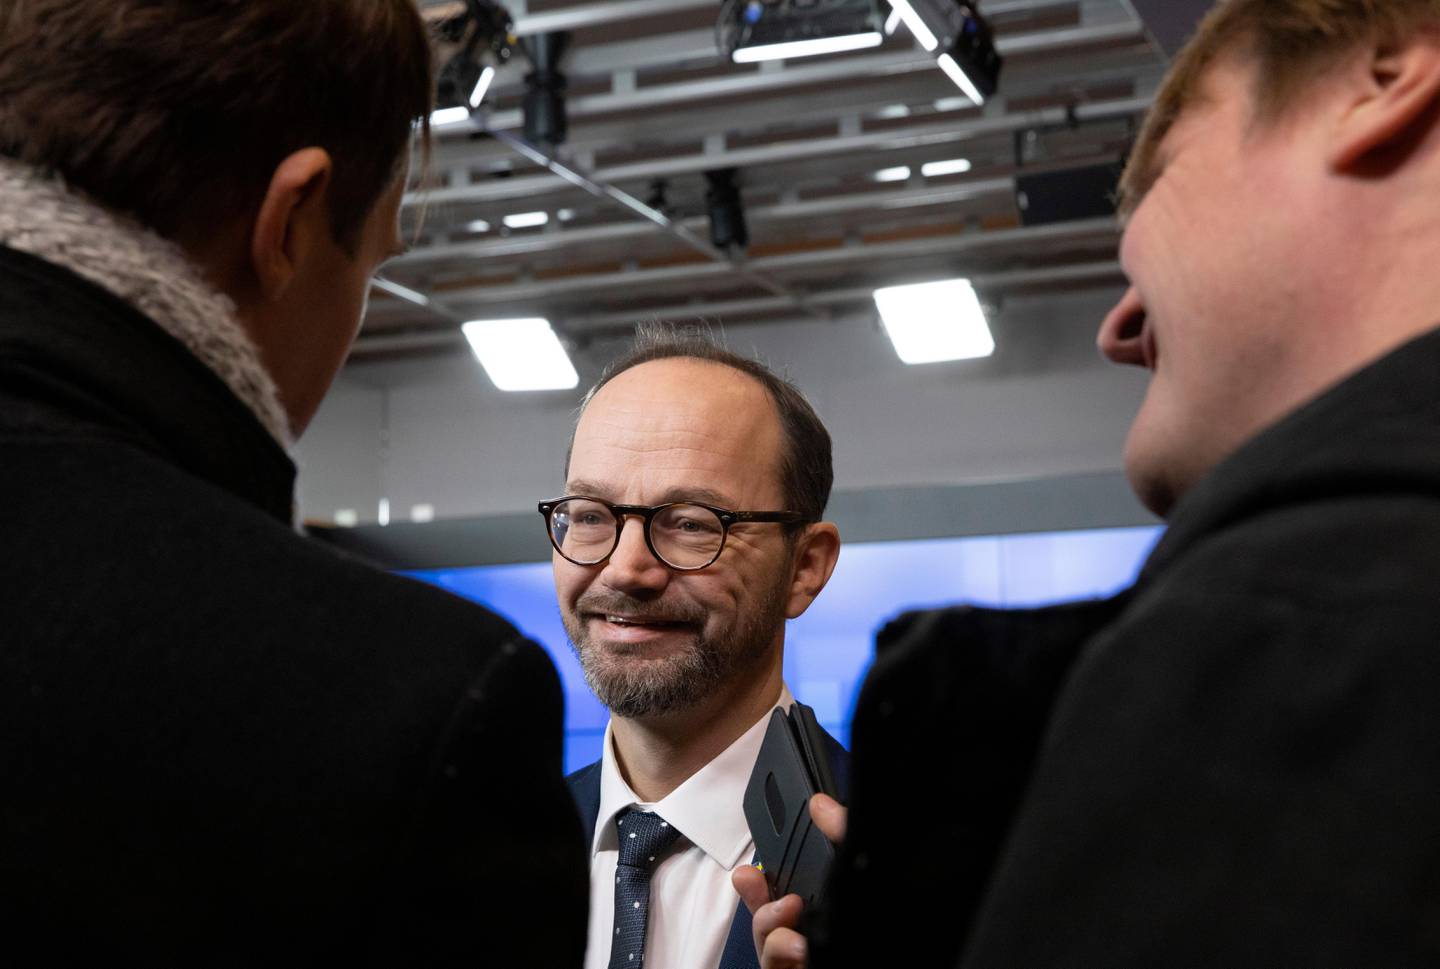 Sweden's Transportation Minister Tomas Eneroth speaks with journalists as he arrives for a meeting of EU transport ministers at the EU Council building in Brussels, Monday, Dec. 2, 2019. (AP Photo/Virginia Mayo)